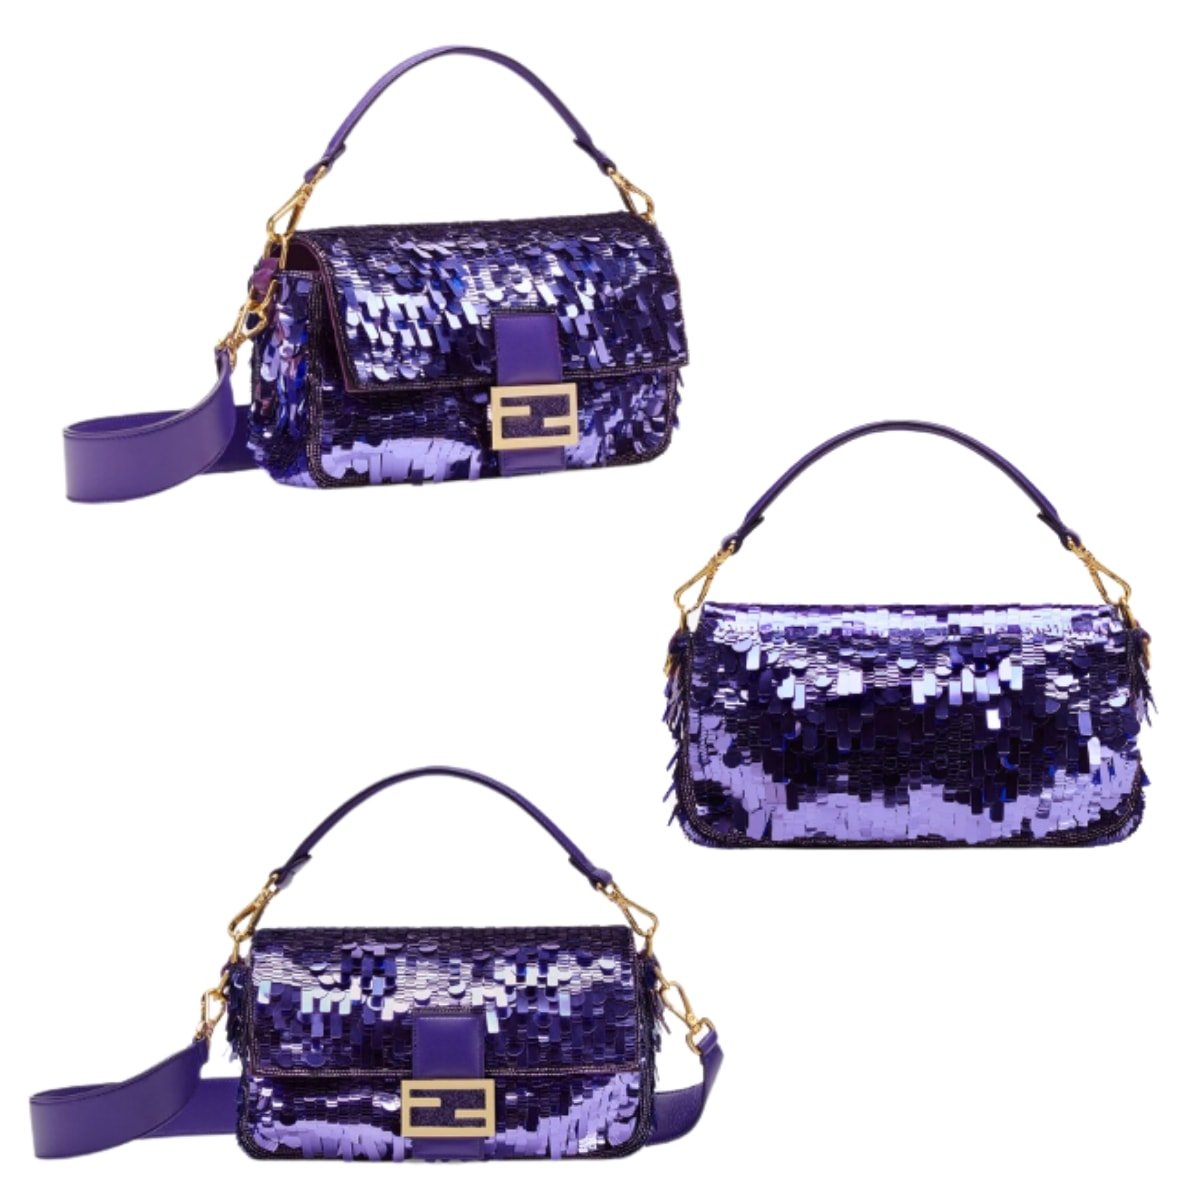 Fendi's iconic medium Baguette bag, with fine, finely embroidered all-over with purple sequins of different shapes and sizes to create a 3D effect and decorated with an FF clasp